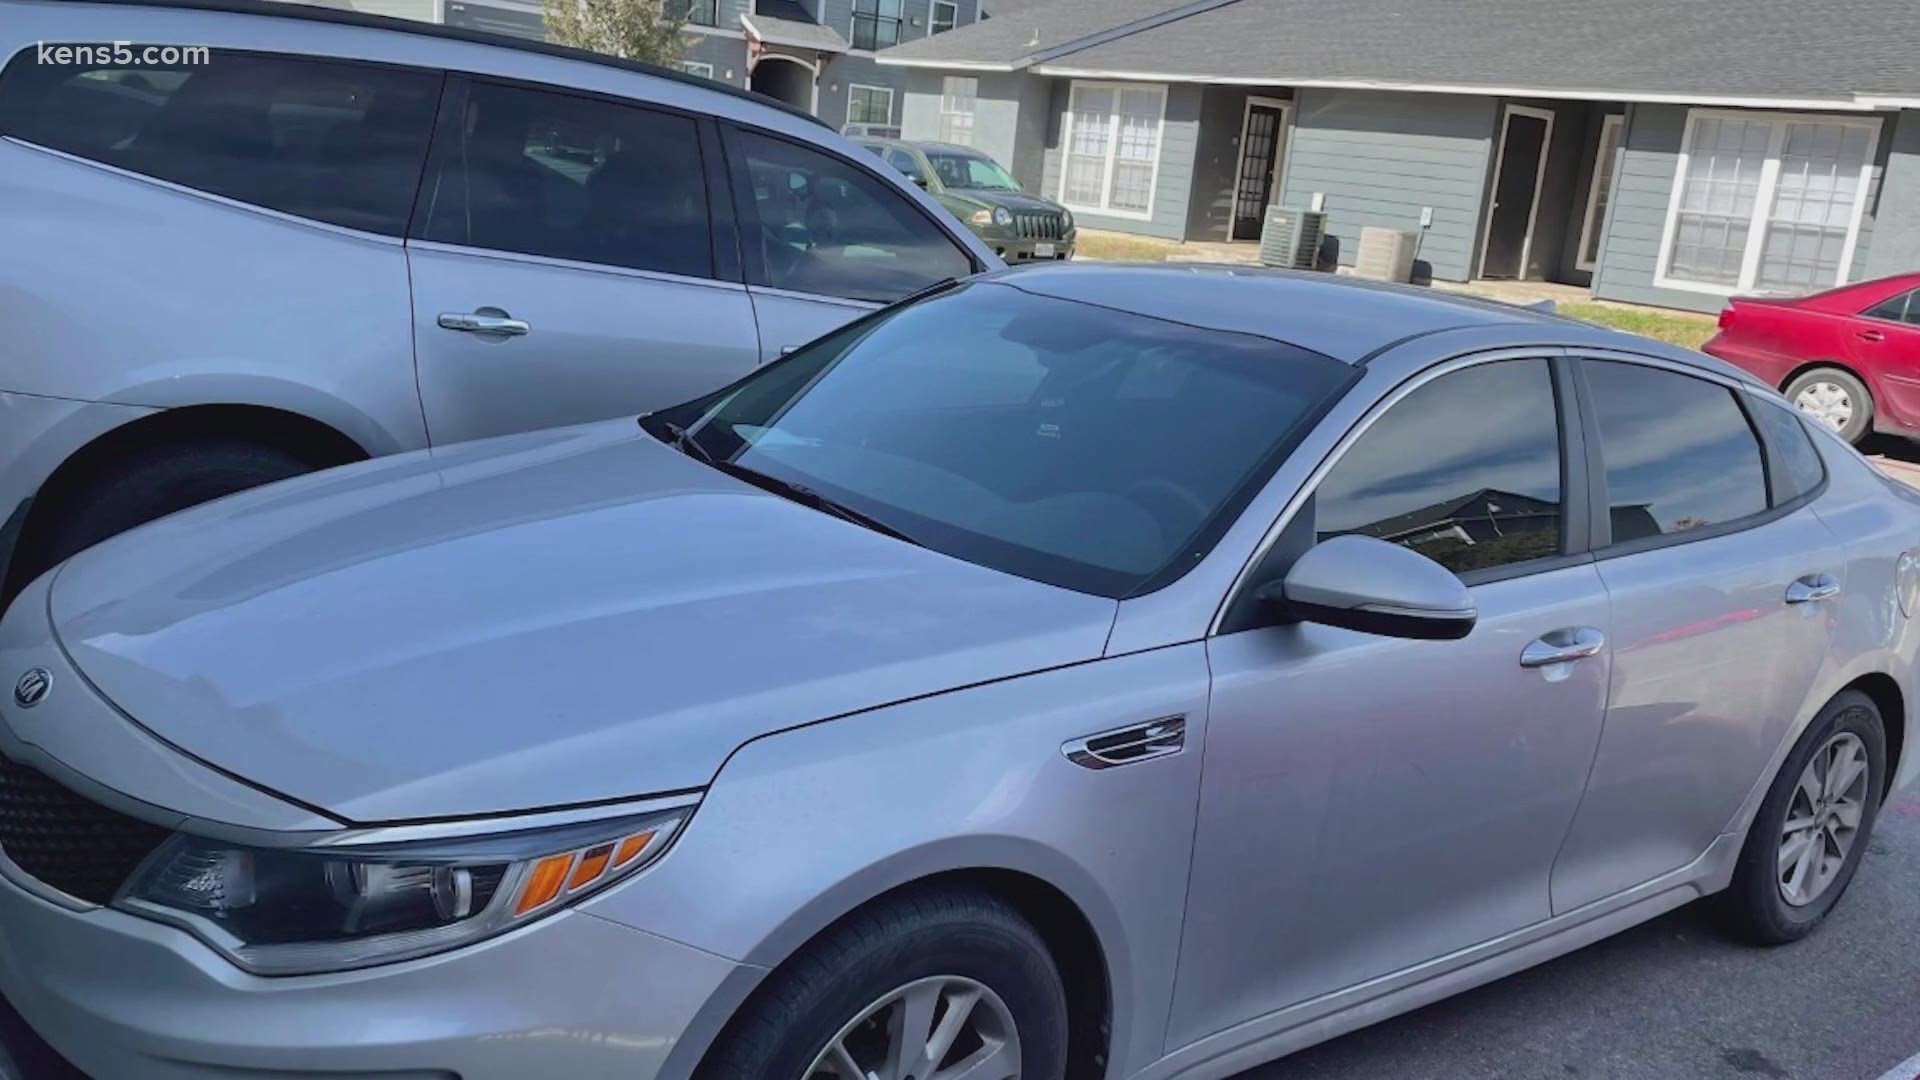 The 2018 Kia Optima was taken from apartments on the west side, and security footage shows a possible suspect.